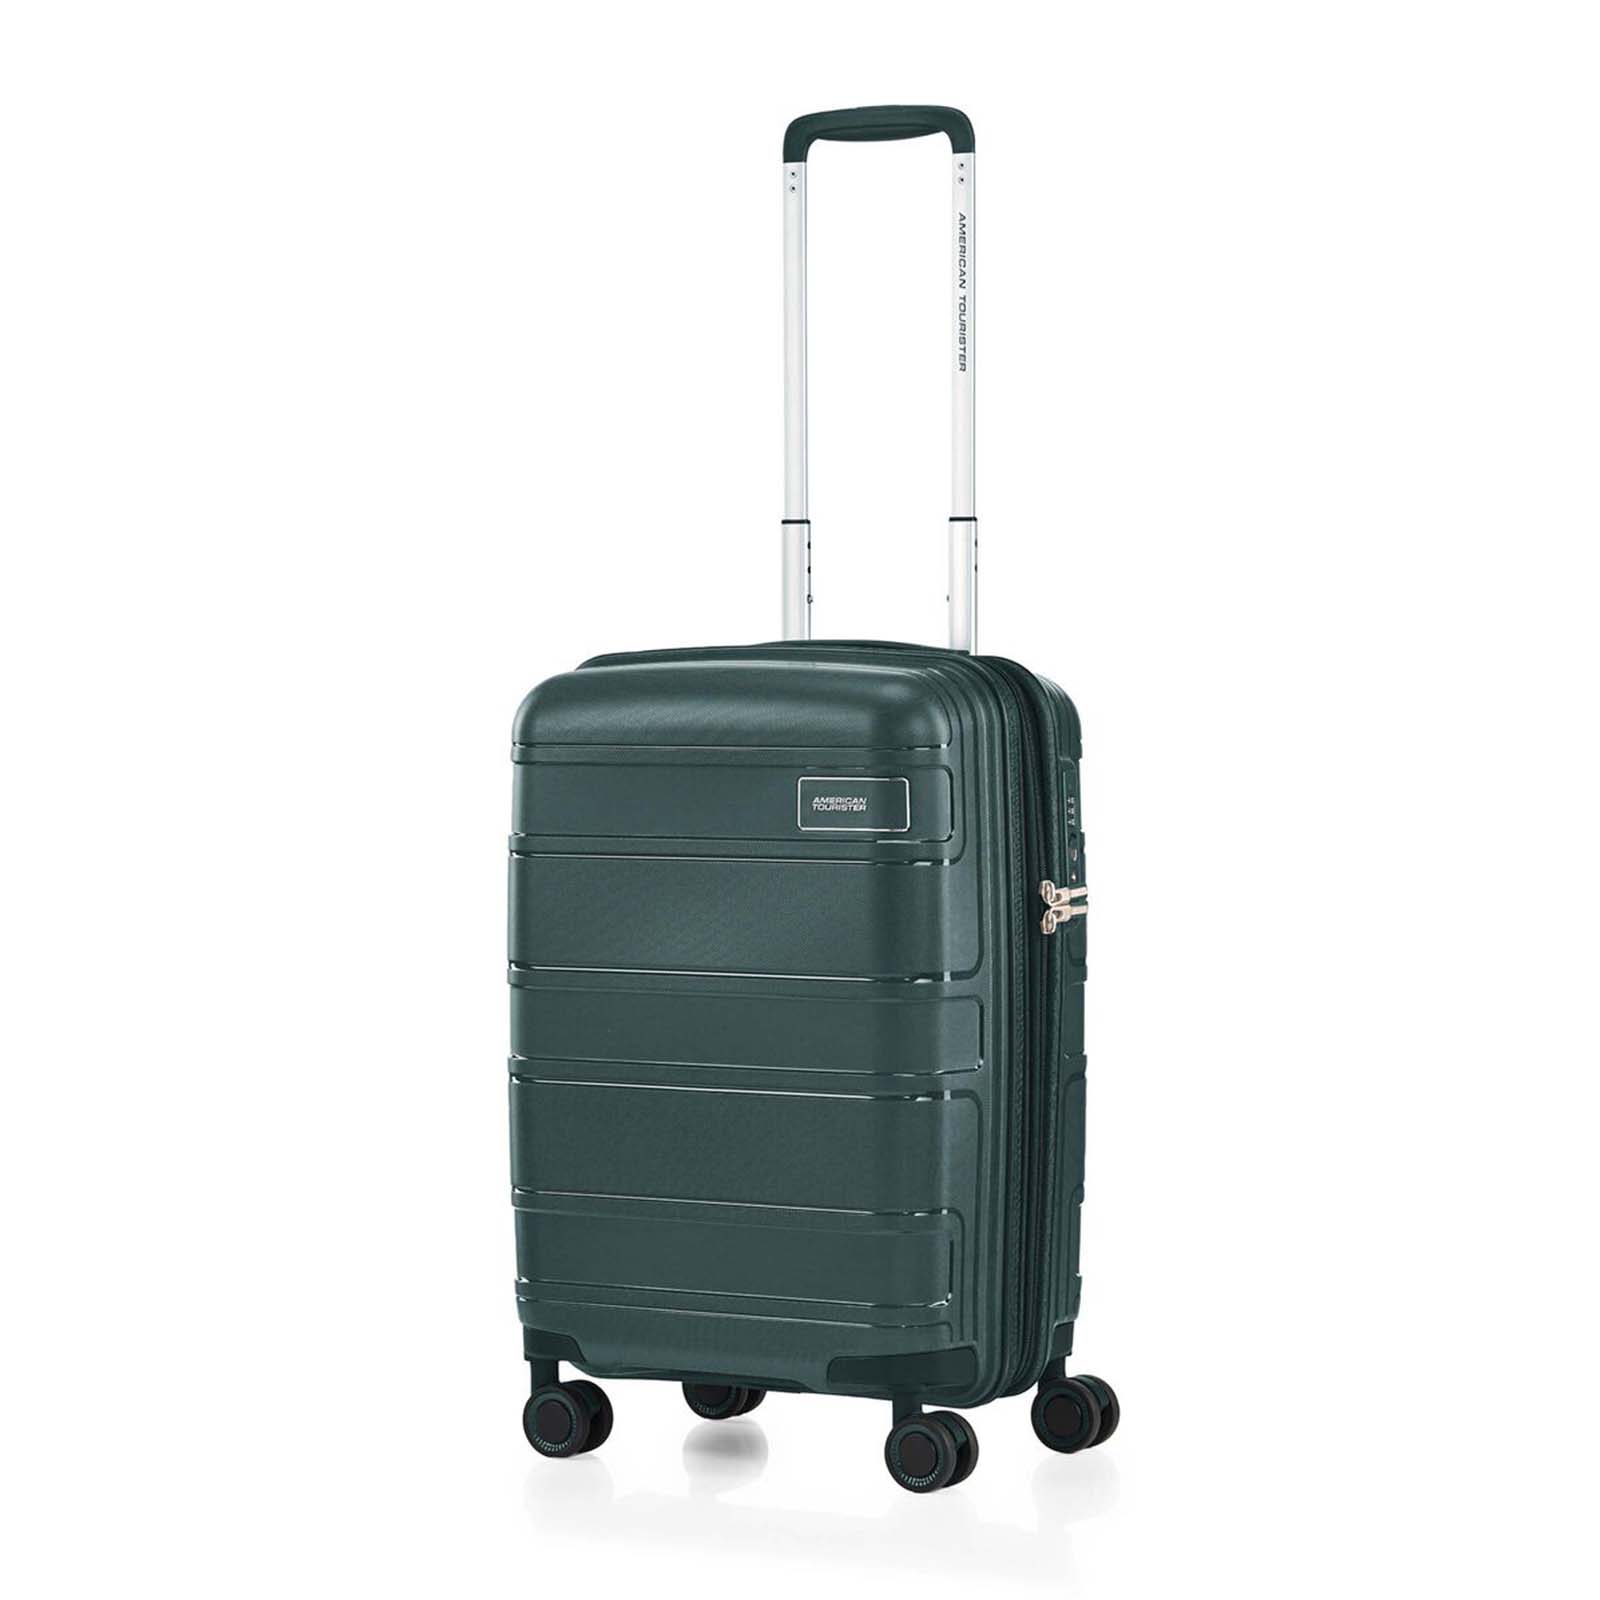 American-Tourister-Light-Max-55cm-Carry-On-Suitcase-Varsity-Green-Front-Angle